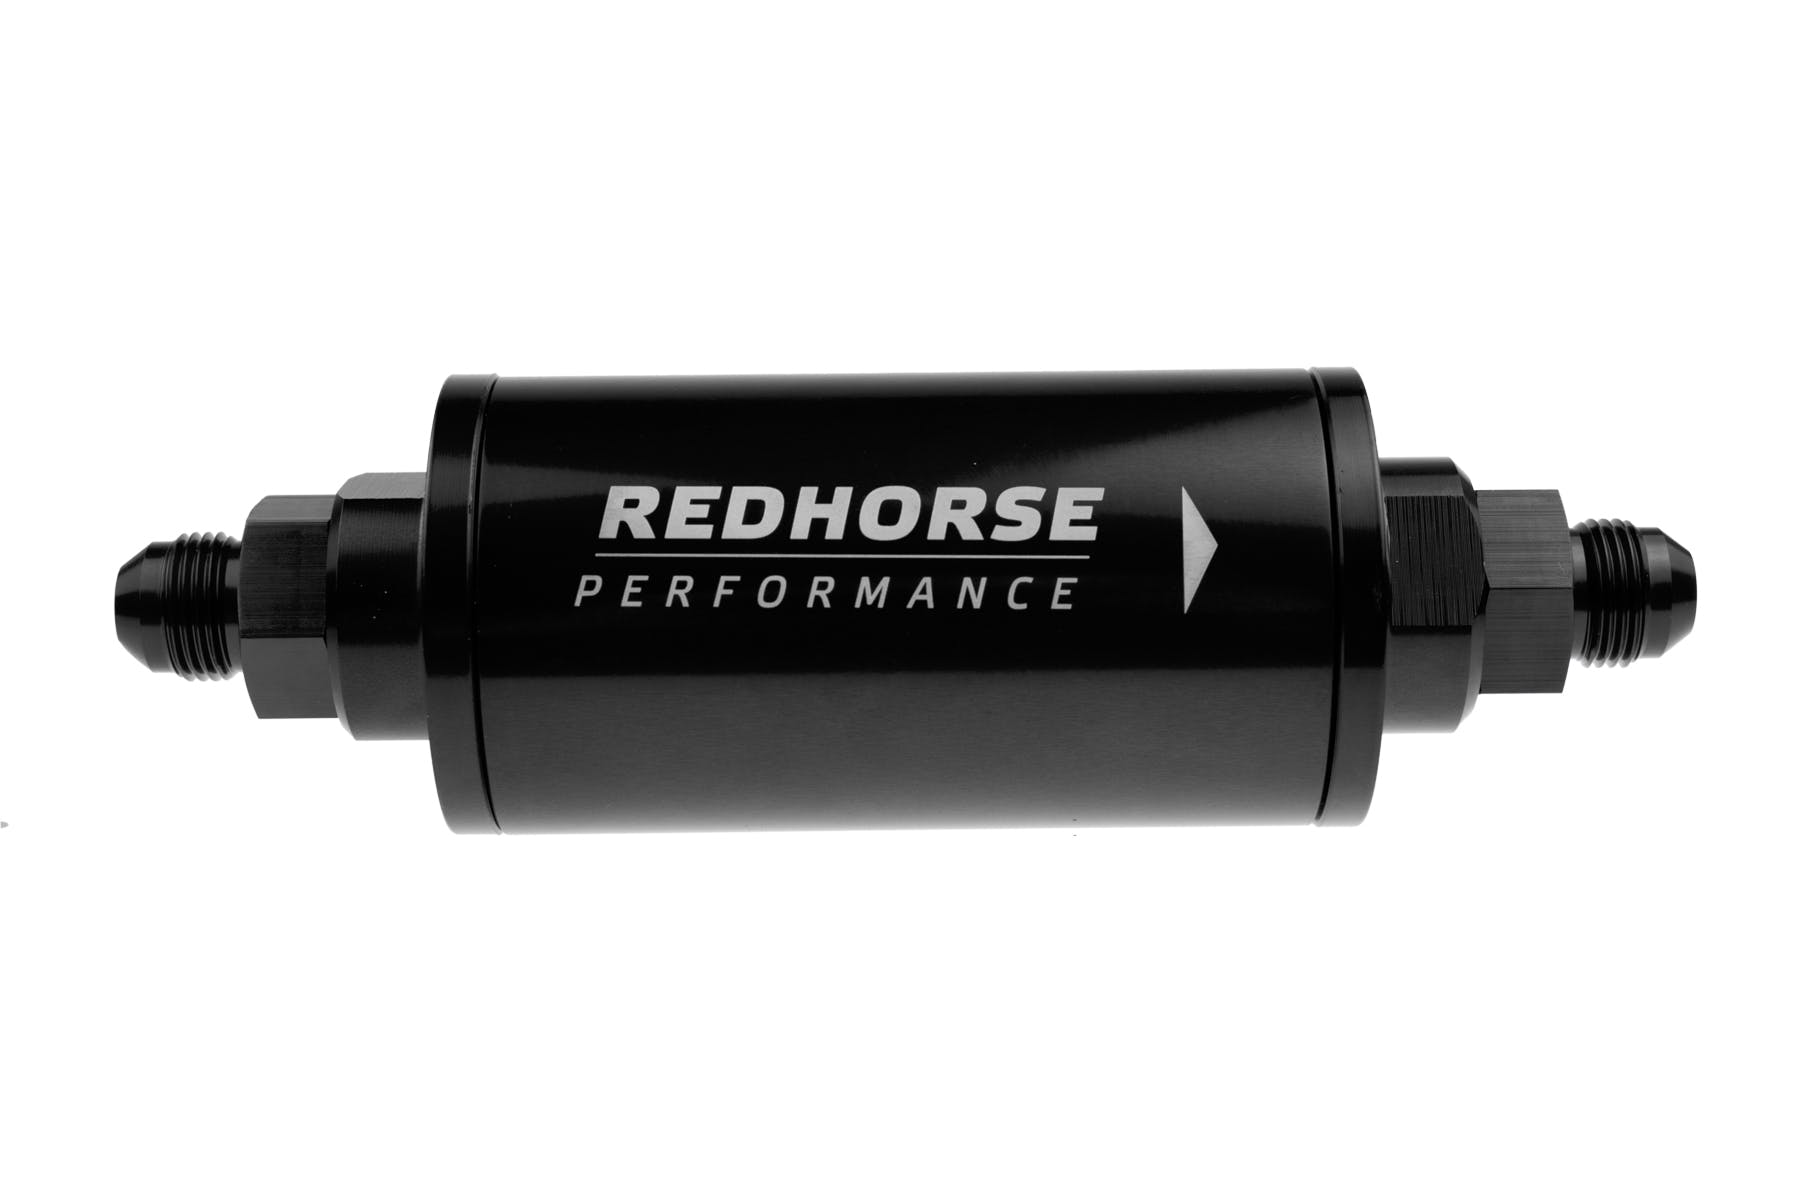 Redhorse Performance 4651-06-2 6in Cylindrical In-Line Race Fuel Filter - 06 AN - Black